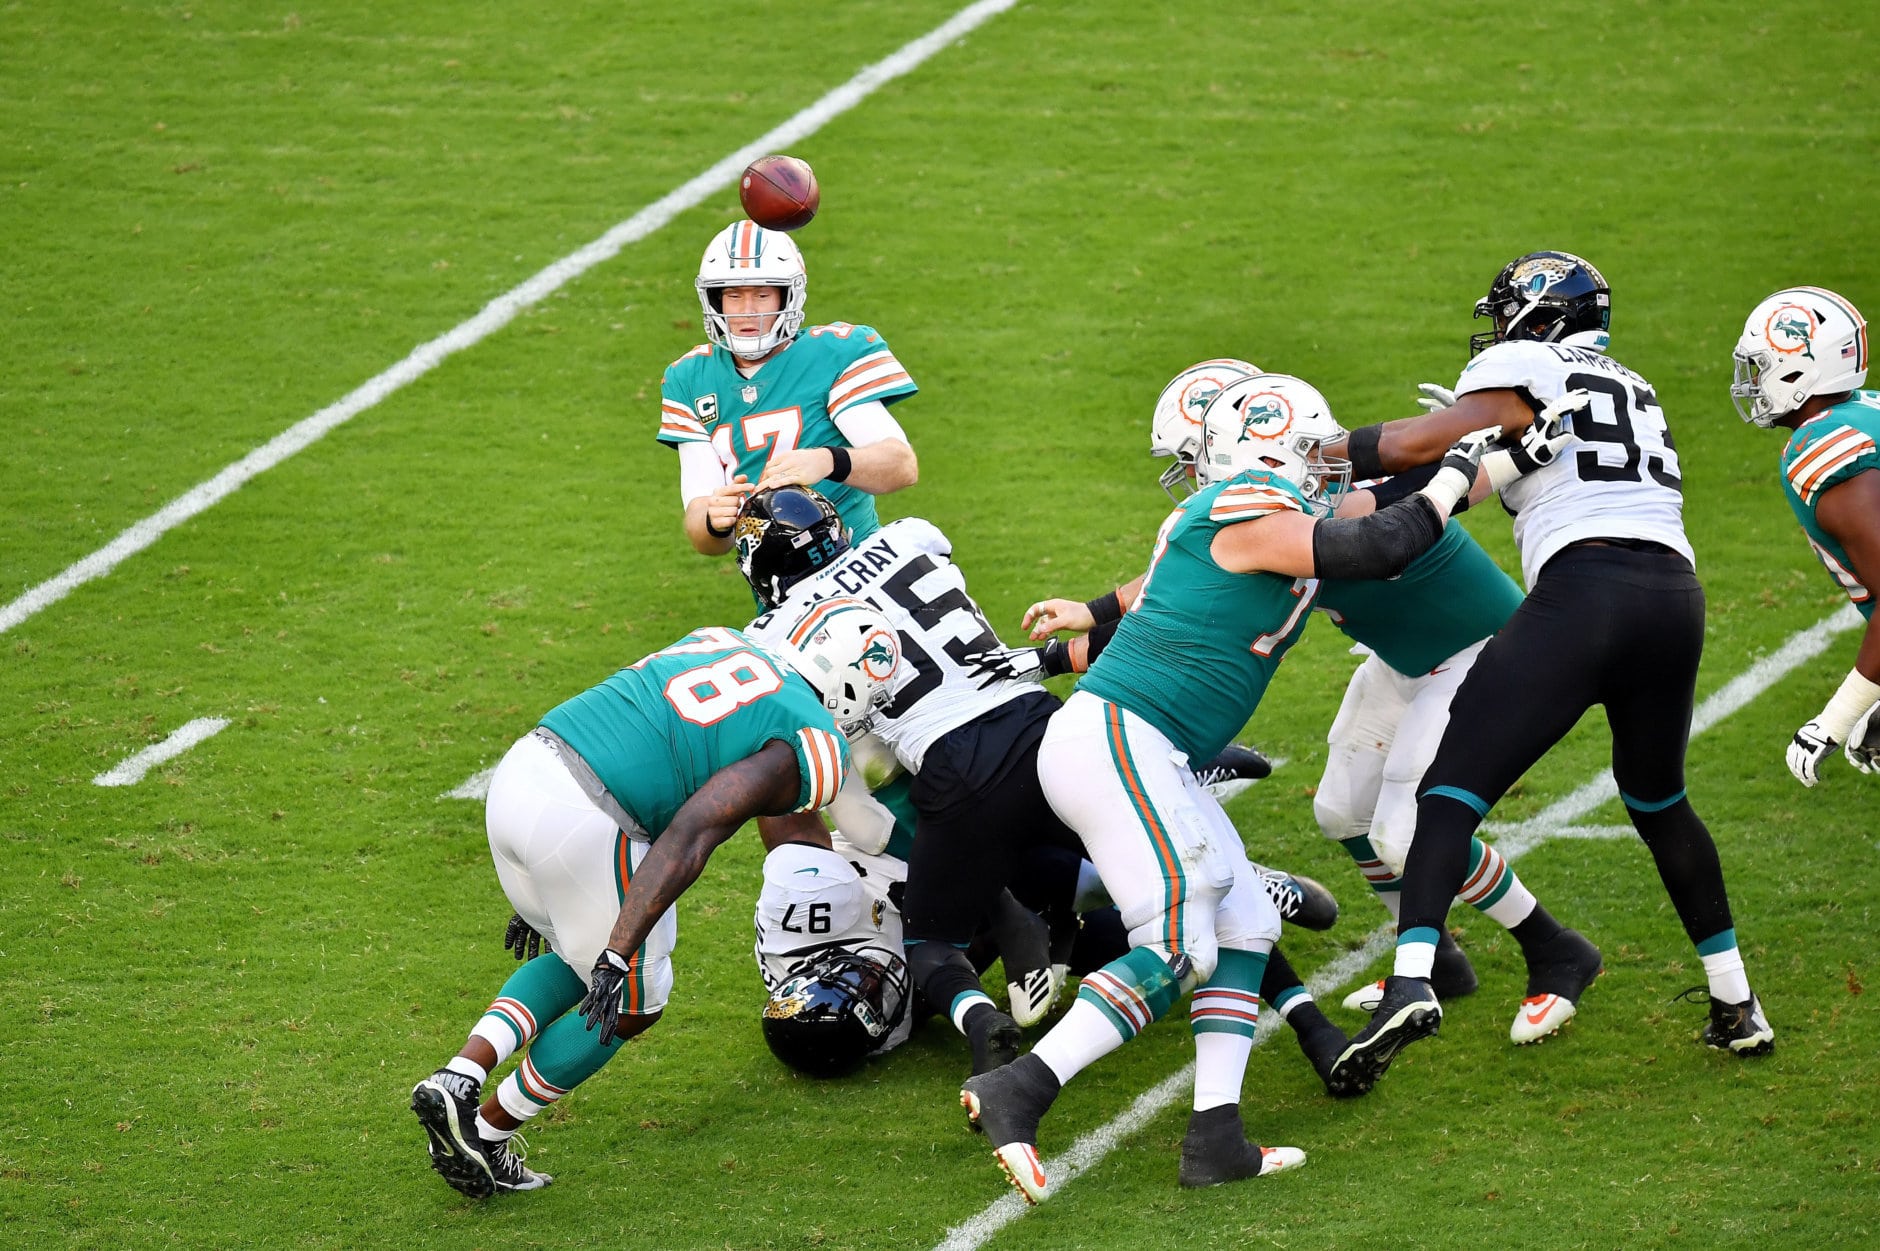 MIAMI, FLORIDA - DECEMBER 23:  Ryan Tannehill #17 of the Miami Dolphins passes under pressure by Lerentee McCray #55 of the Jacksonville Jaguars at Hard Rock Stadium on December 23, 2018 in Miami, Florida. (Photo by Mark Brown/Getty Images)